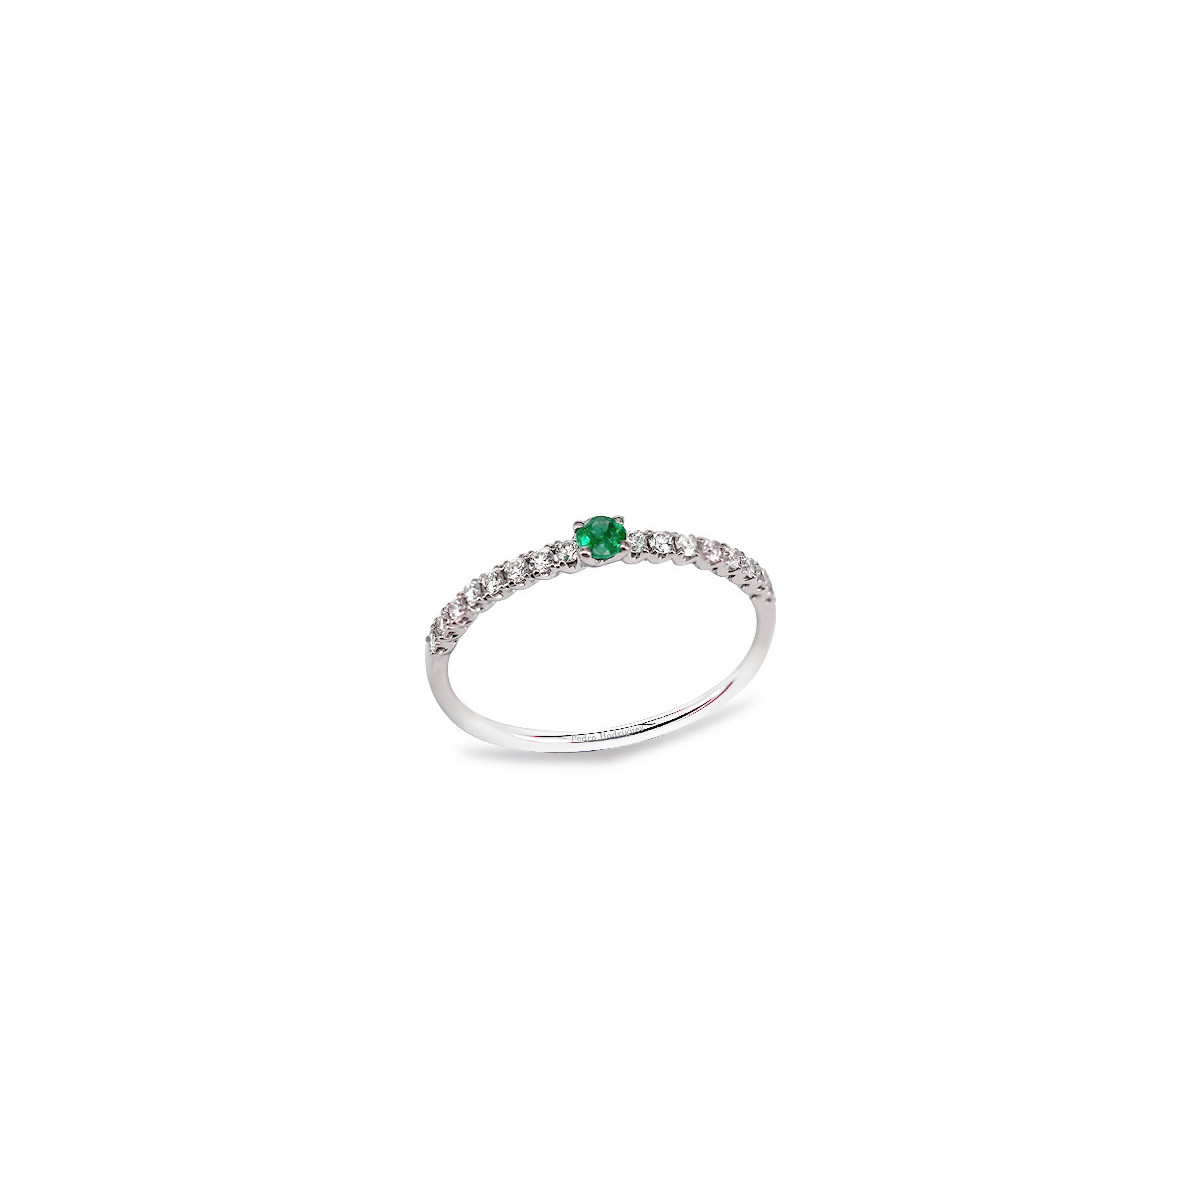 RING WITH EMERALD AND WHITE GOLD DIAMONDS